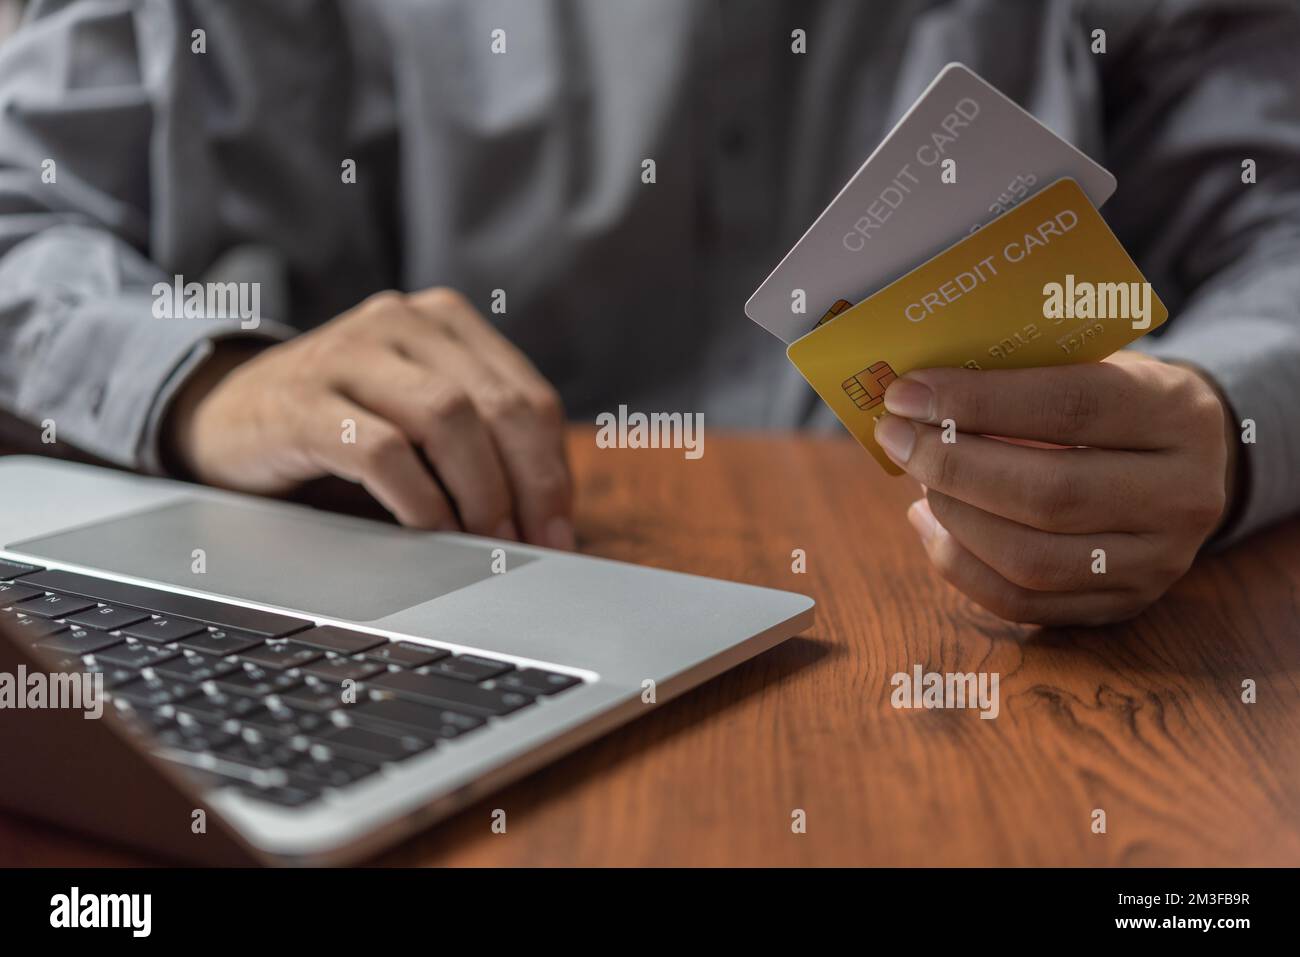 Man holding credit card on hand with laptop computer.Business financial internet banking online digital technology payment e commerce concept. Stock Photo